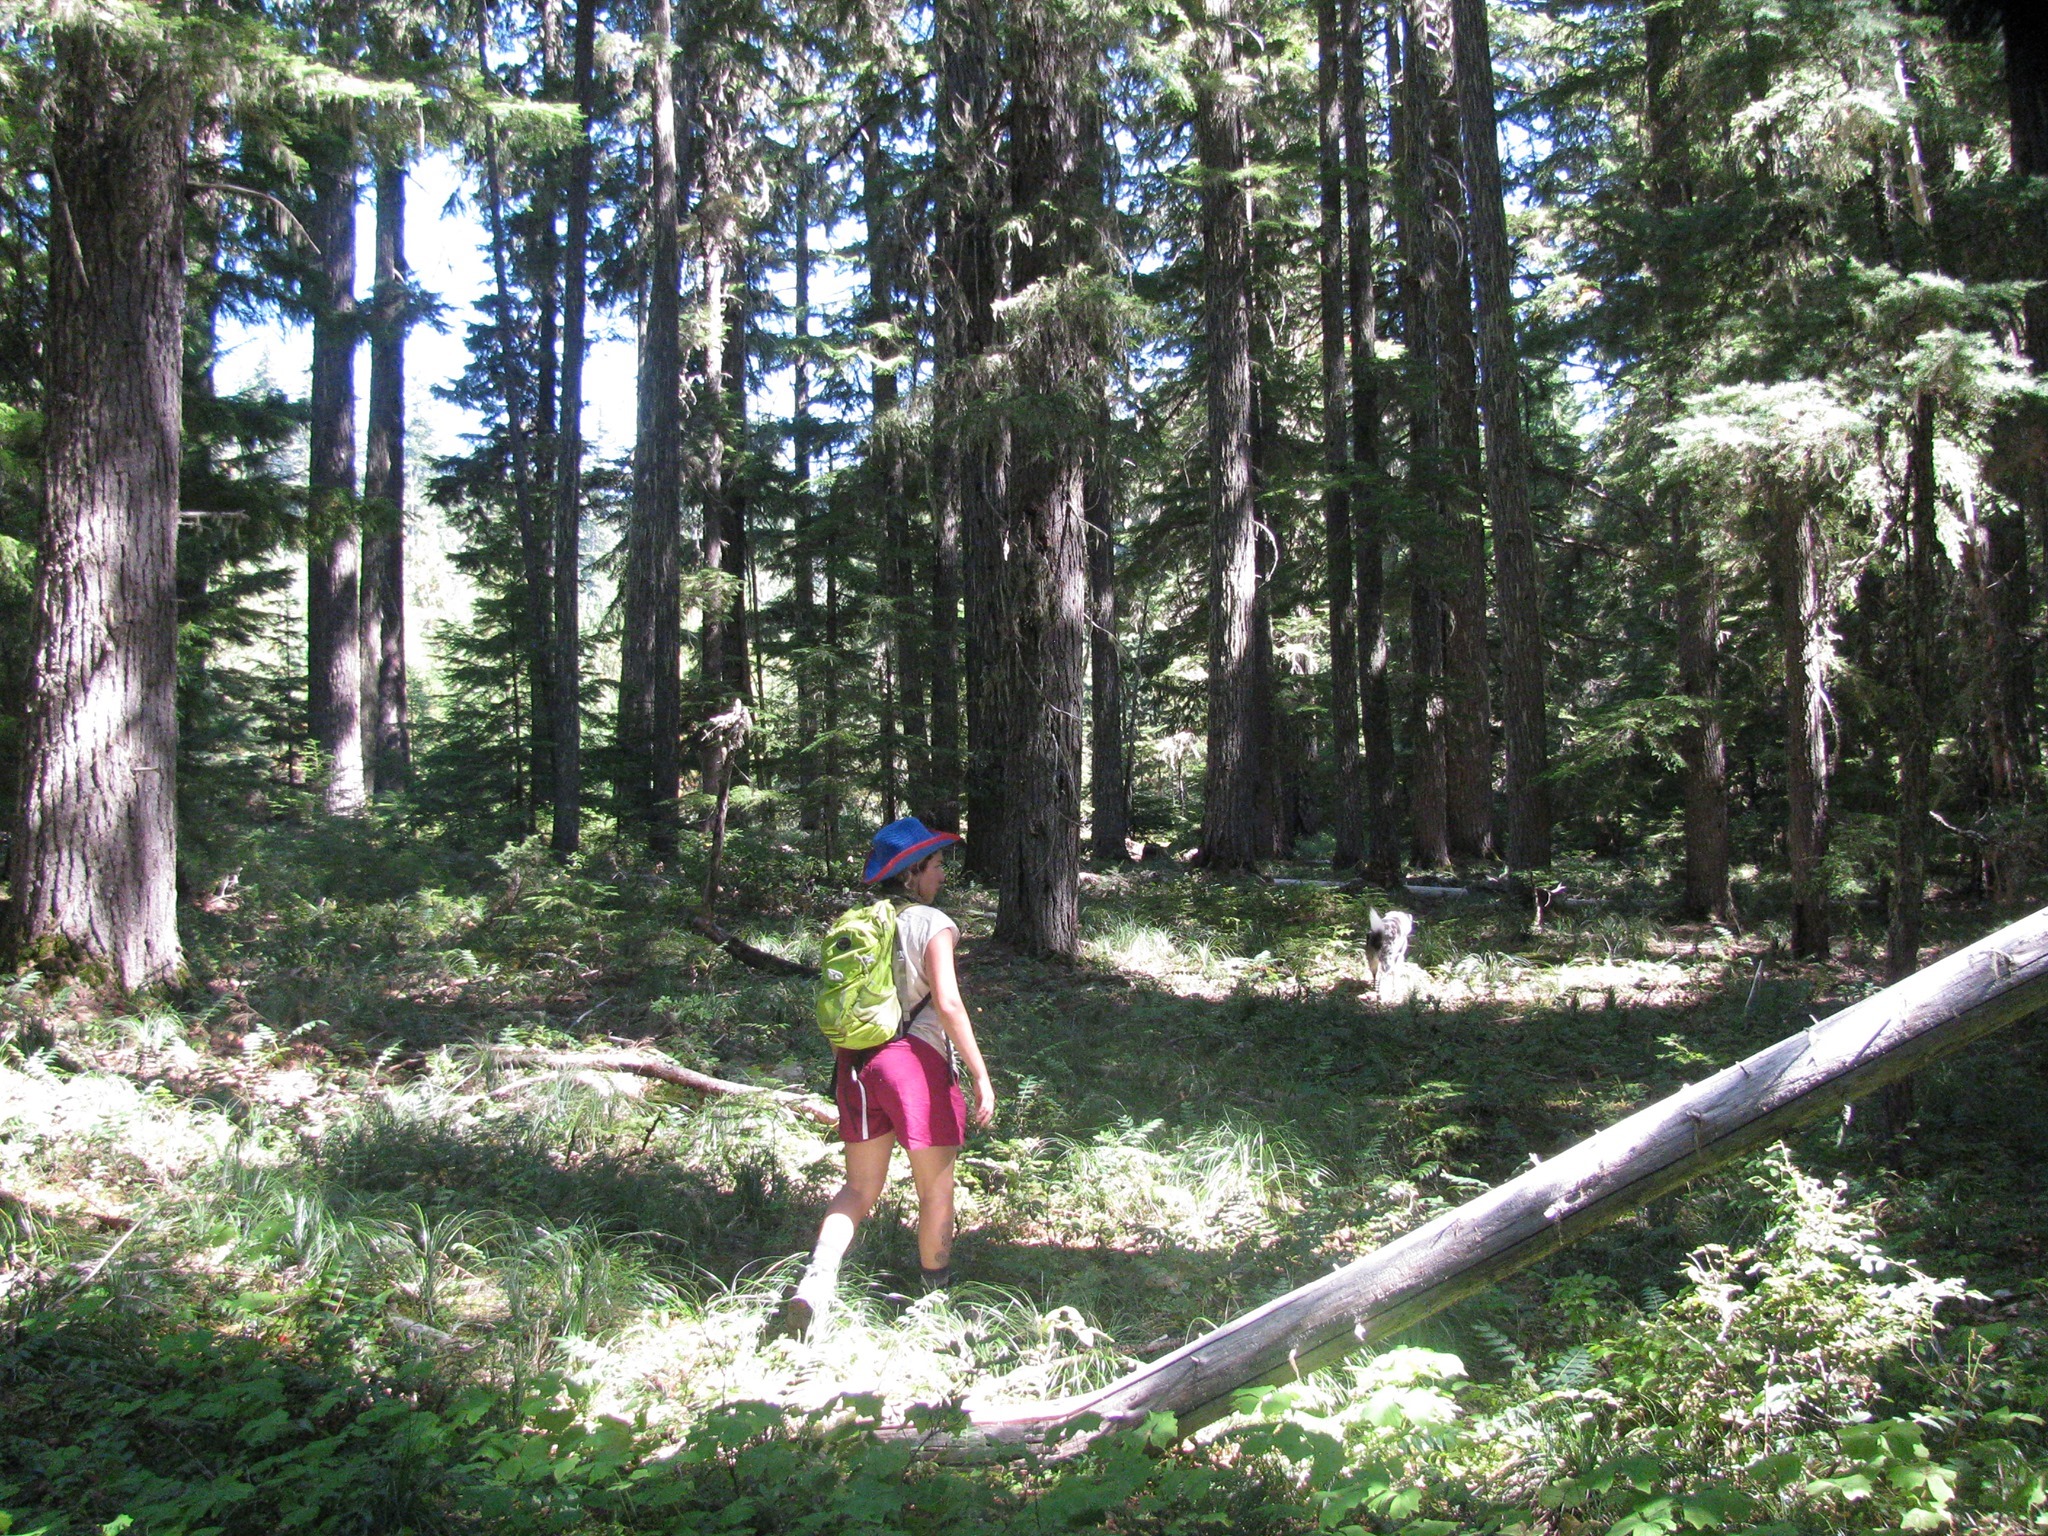 Color photo of a Bark volunteer wearing a blue hat, pink shorts, and a lime green backpack walking in the forest. The light is dappled amongst the fir trees and forest floor.